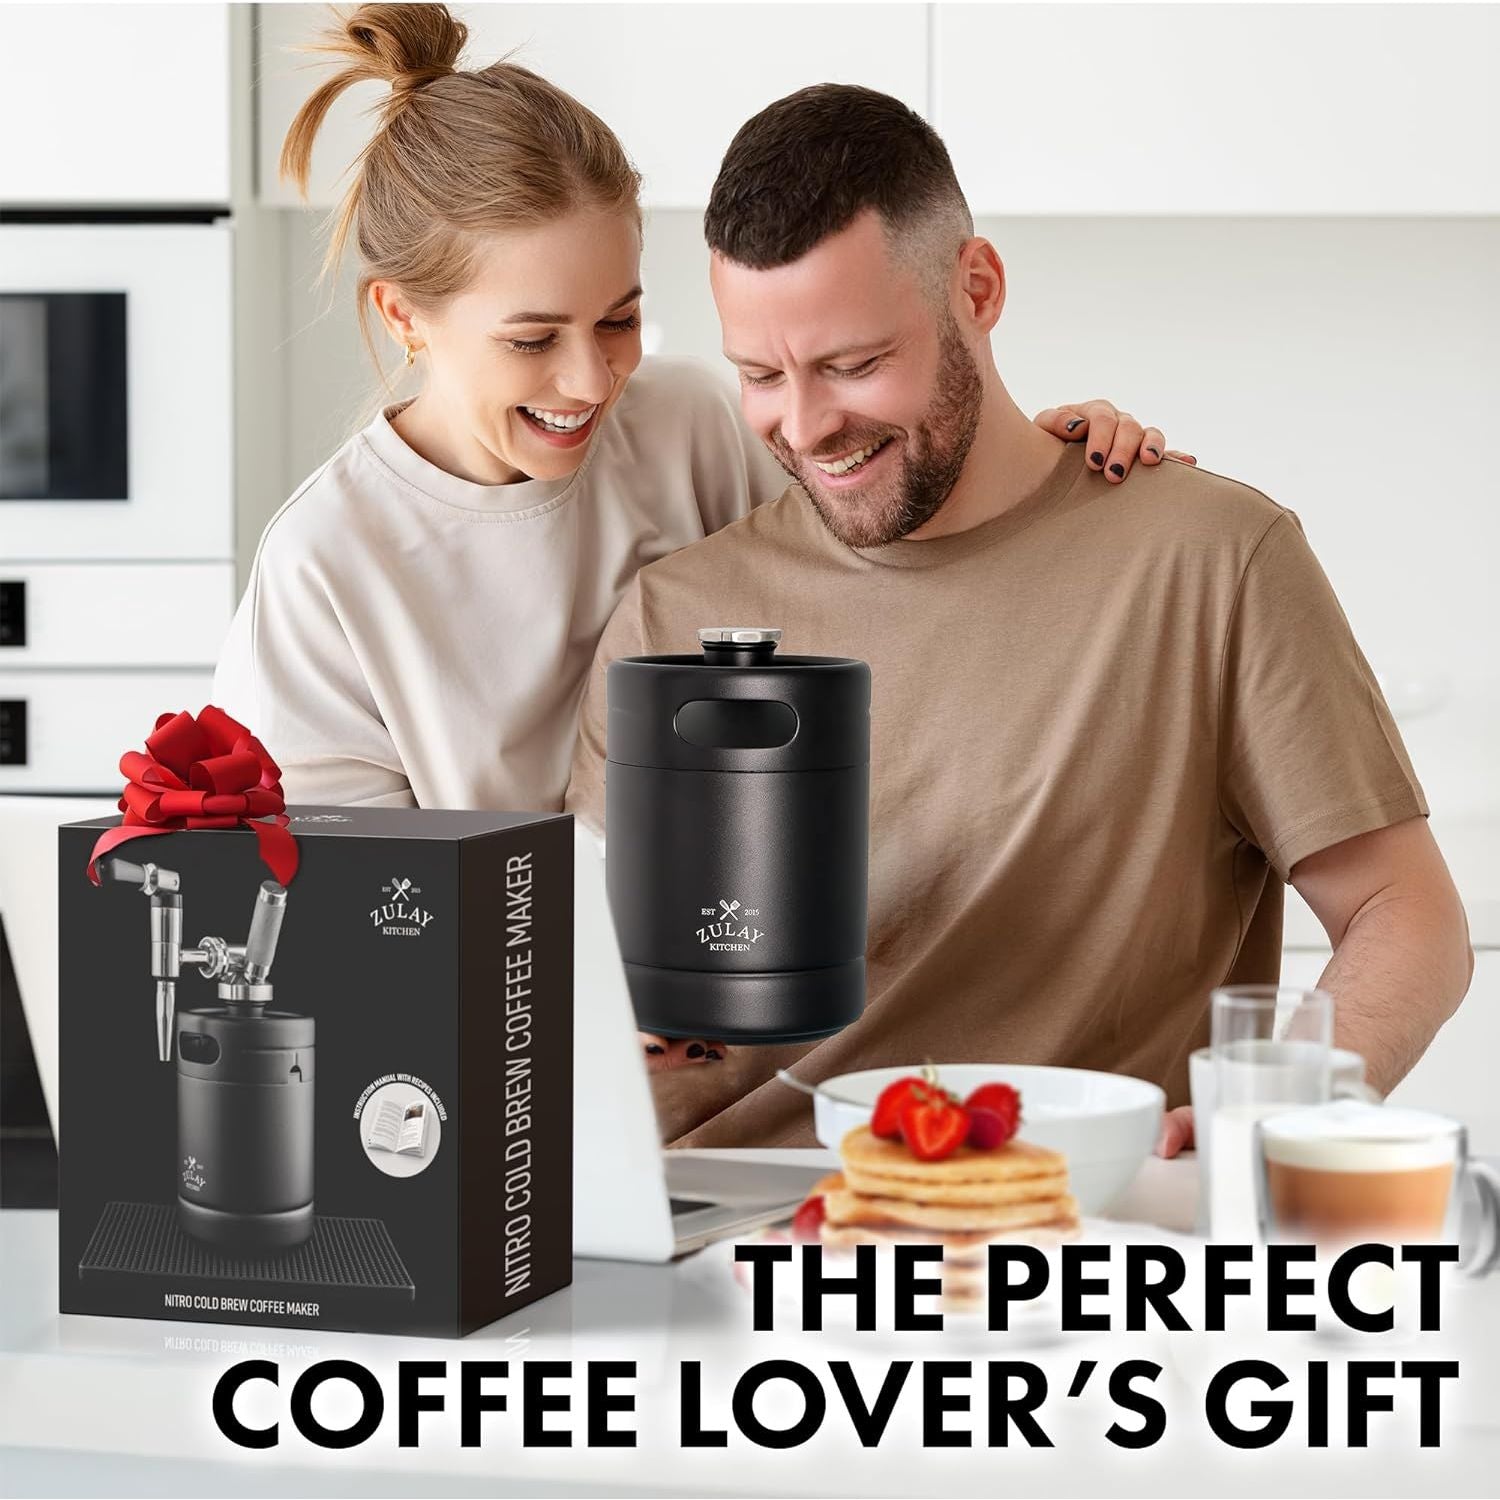 Nitro Cold Brew Machine is a perfect gift for coffee lovers